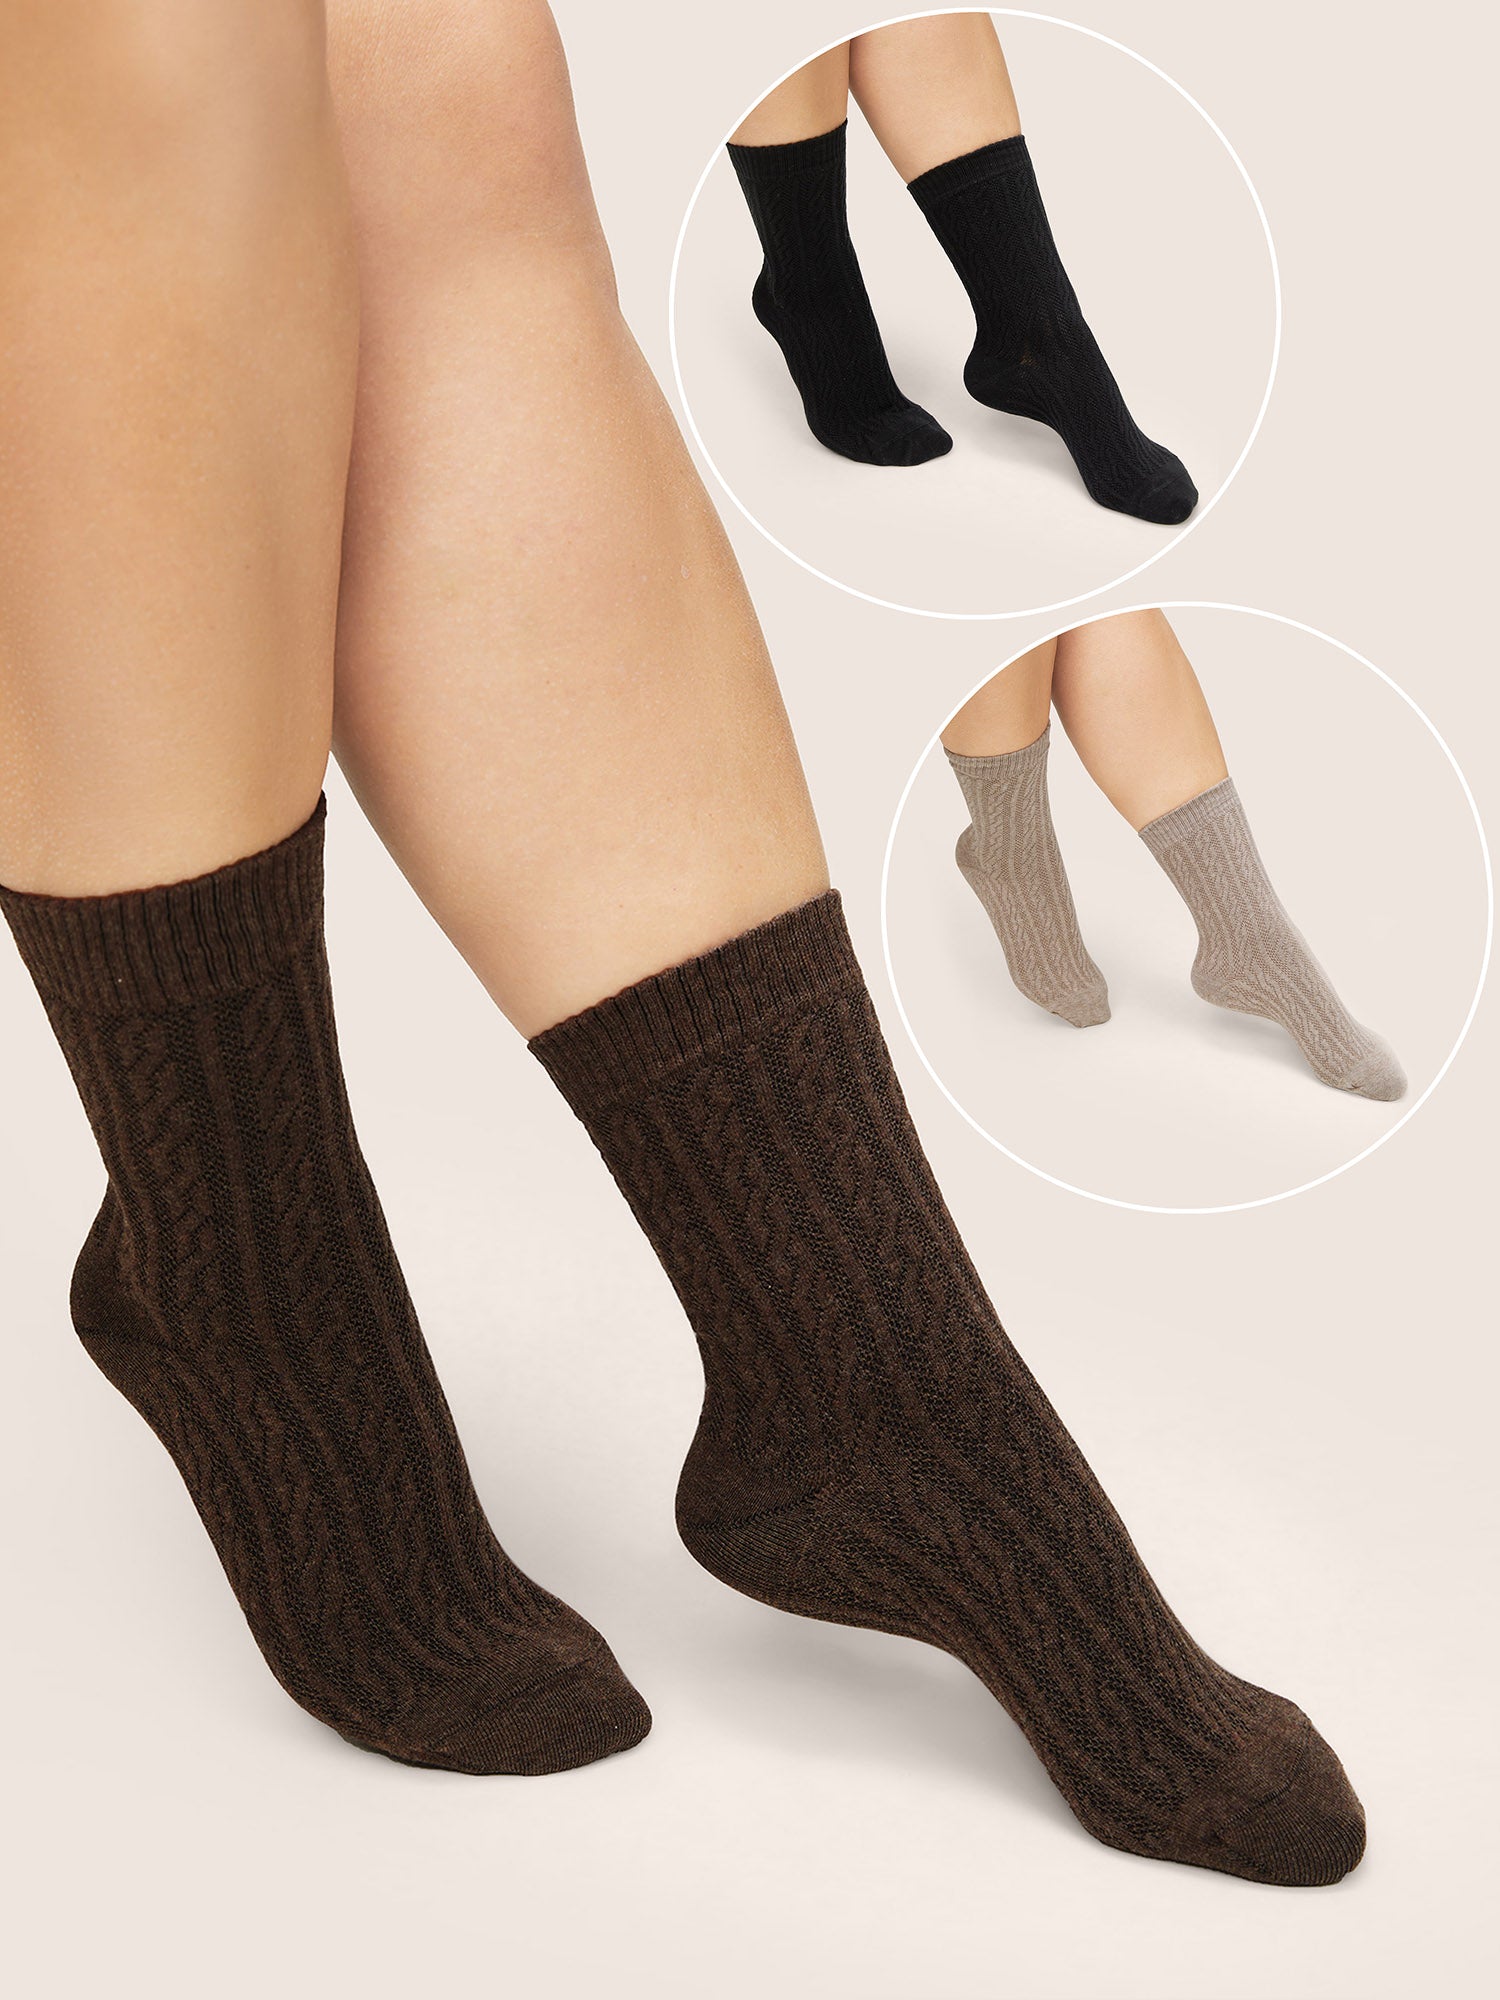 

Plus Size Socks Tights | 3 Pairs Solid Cotton Cable Knit Socks | BloomChic, Multicolor